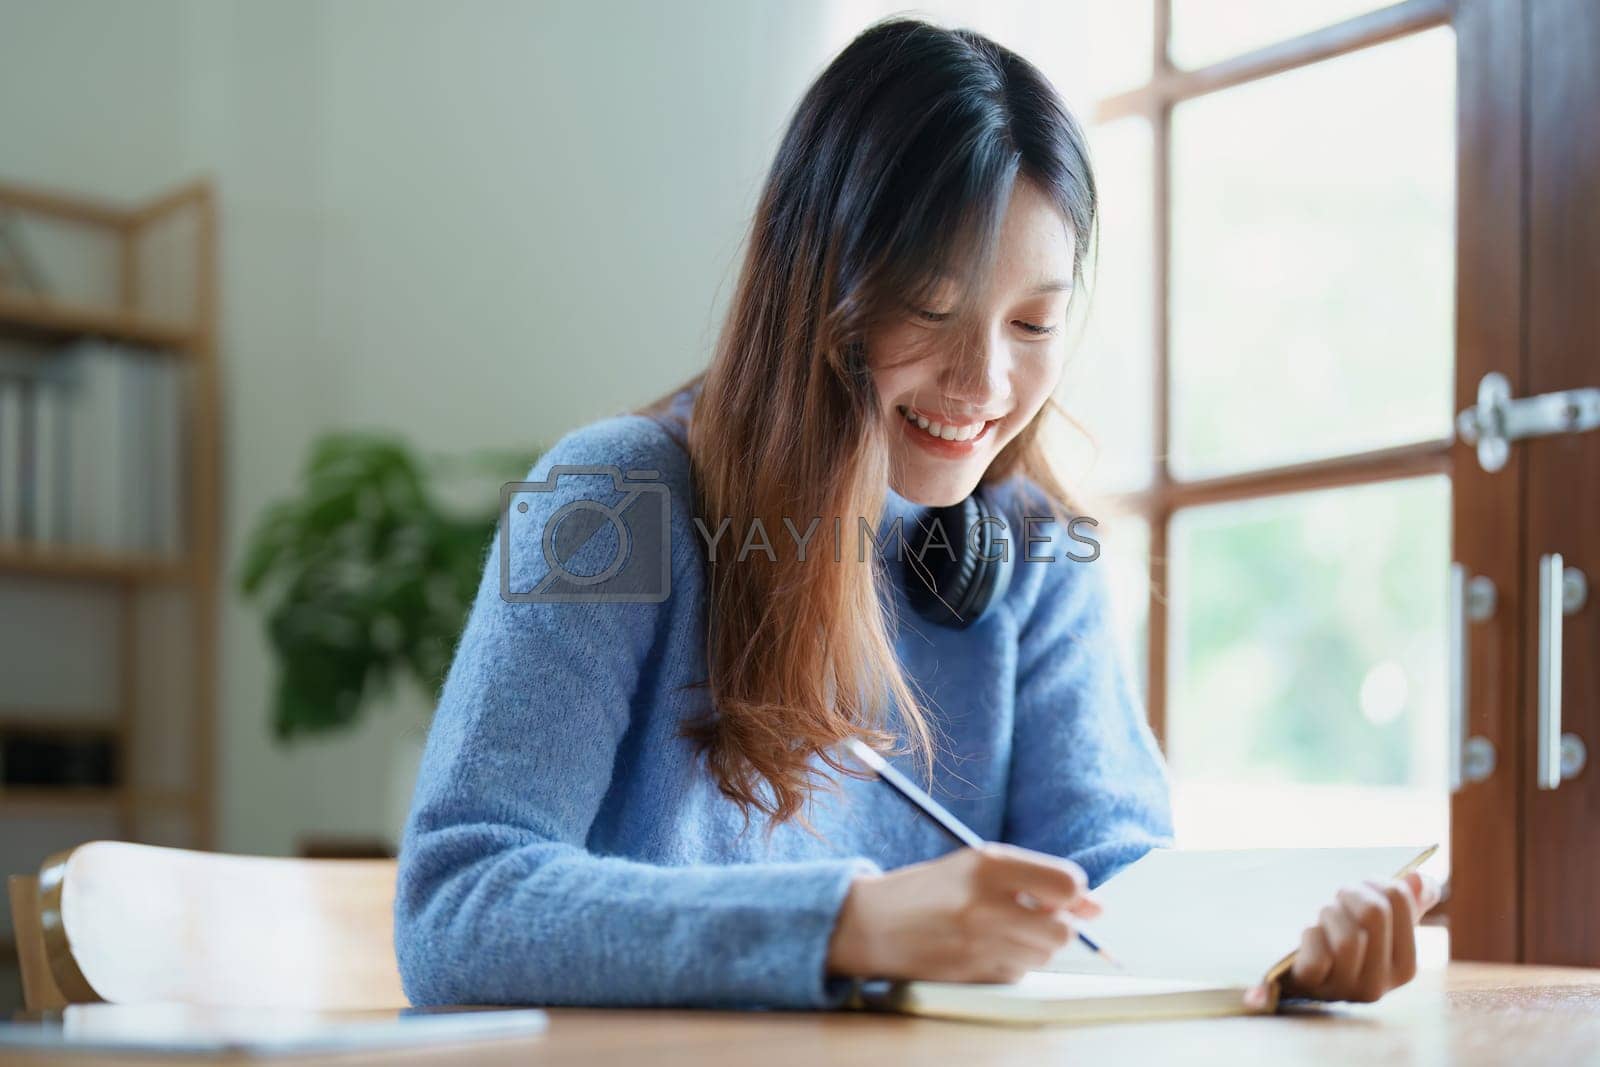 Royalty free image of Portrait of a teenage Asian woman using a notebook to study online via video conferencing on a wooden desk at home by Manastrong